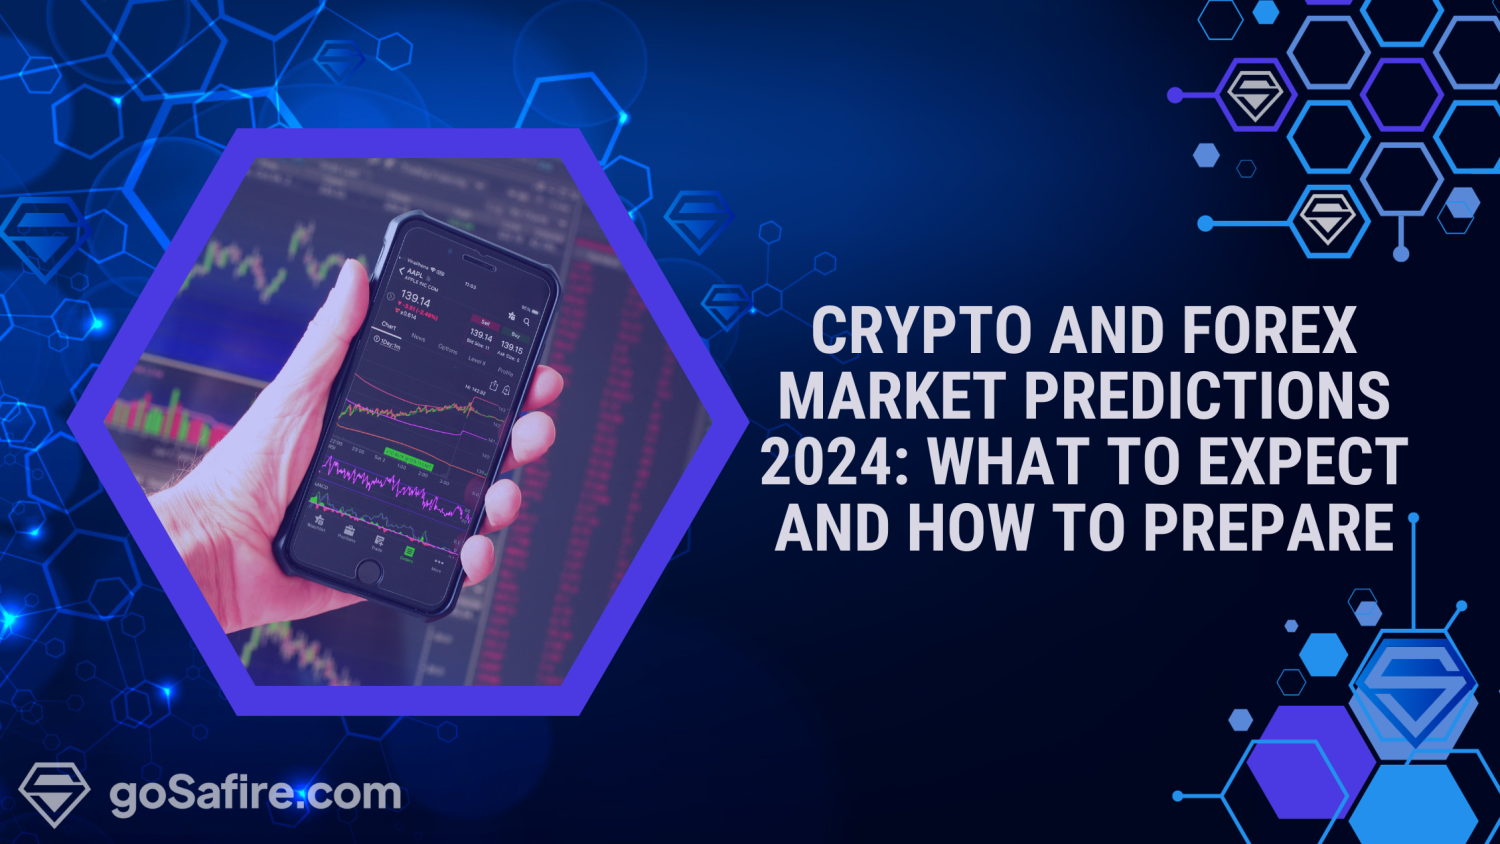 Crypto and Forex Market Predictions 2024: What to Expect and How to Prepare